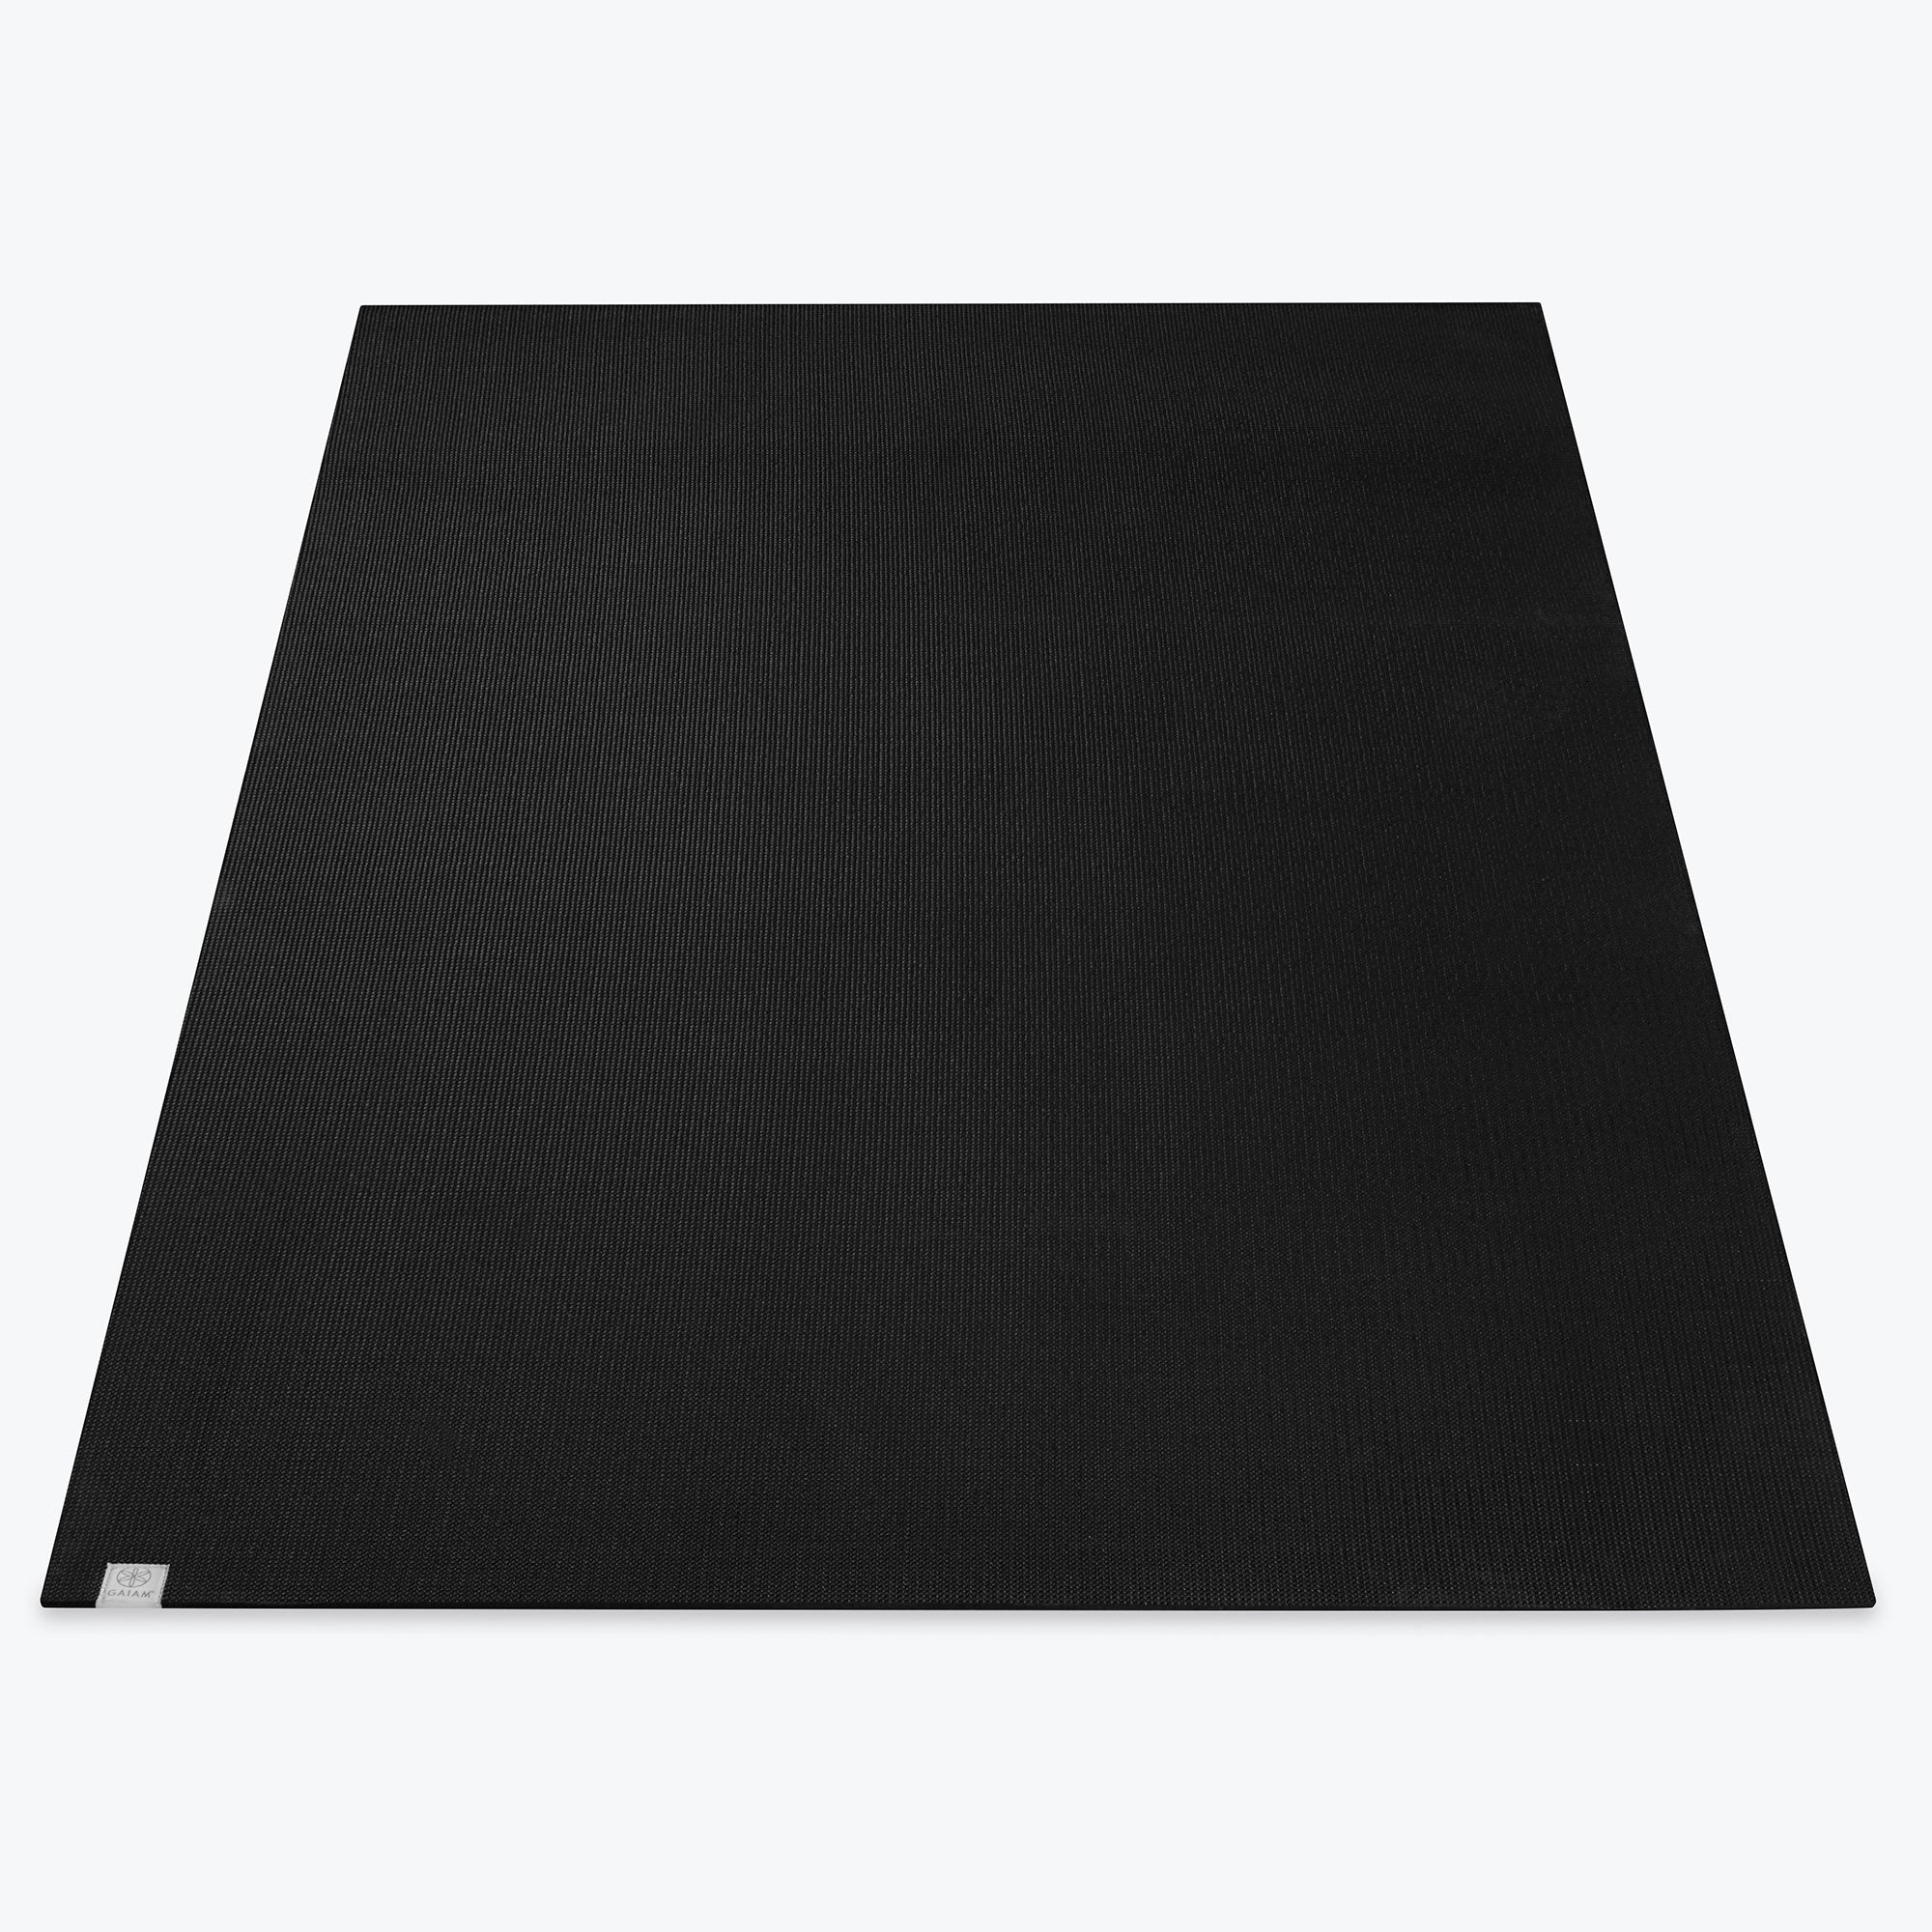 Widewing Mat: The Ultimate 36-inch Wide Yoga Mat - SeaGreen